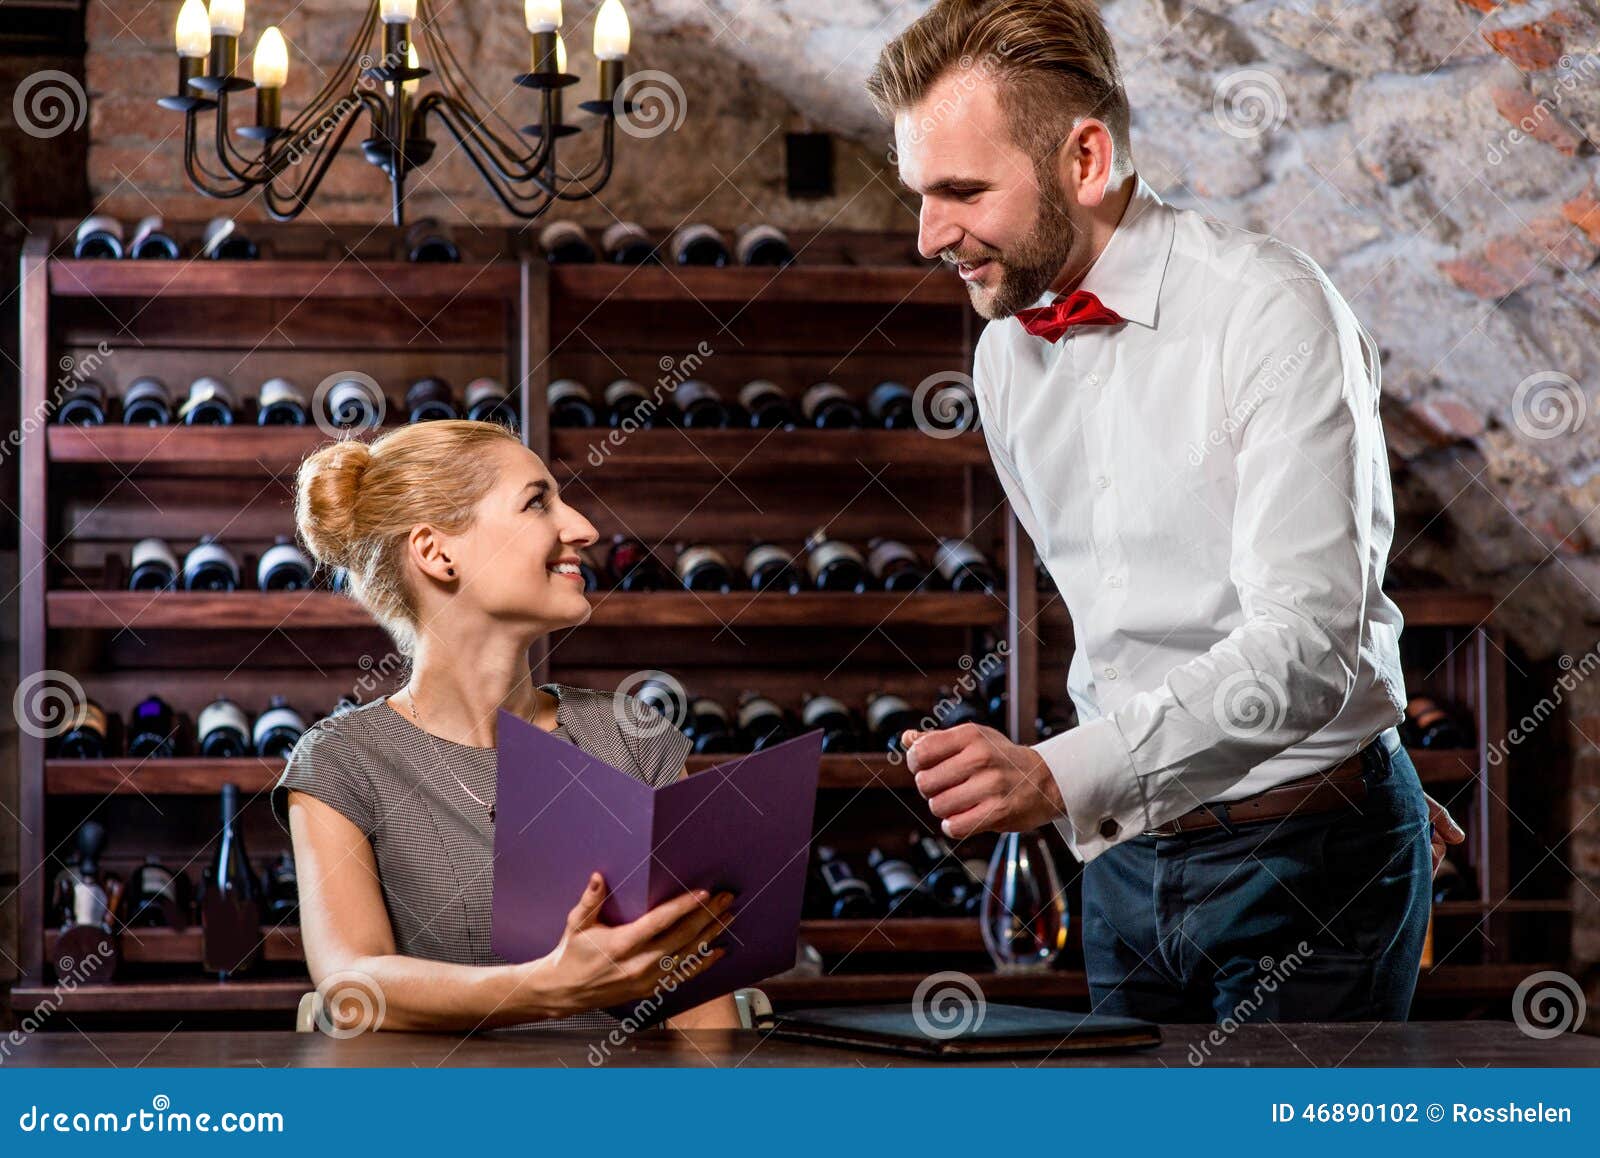 sommelier with young woman on degustation in the